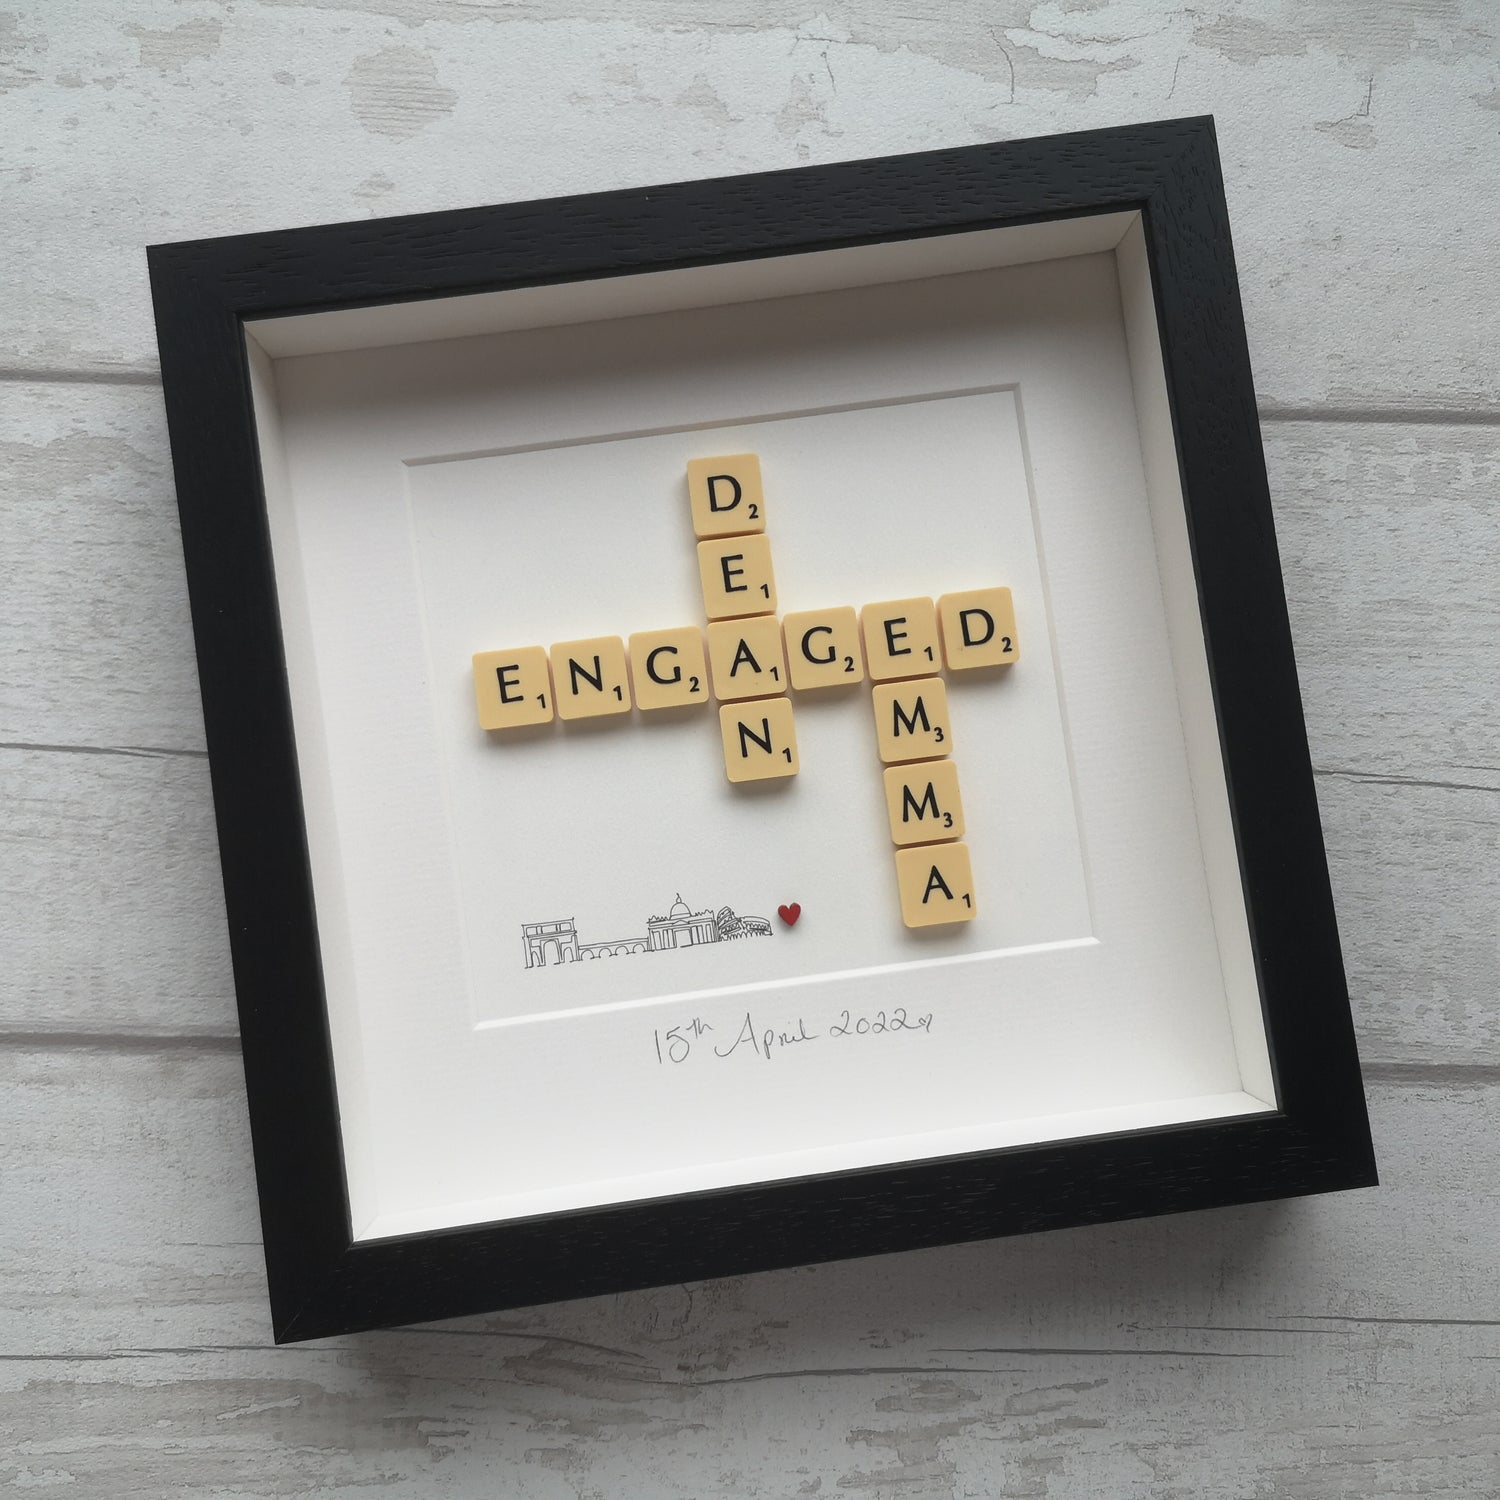 2 names and ENGAGED in vintage cream scrabble tiles on a off-white backing and a little red wooden love heart, with the date of their engagement written in pencil below. In a black handmade wooden 25x25cm deep box wooden frame.